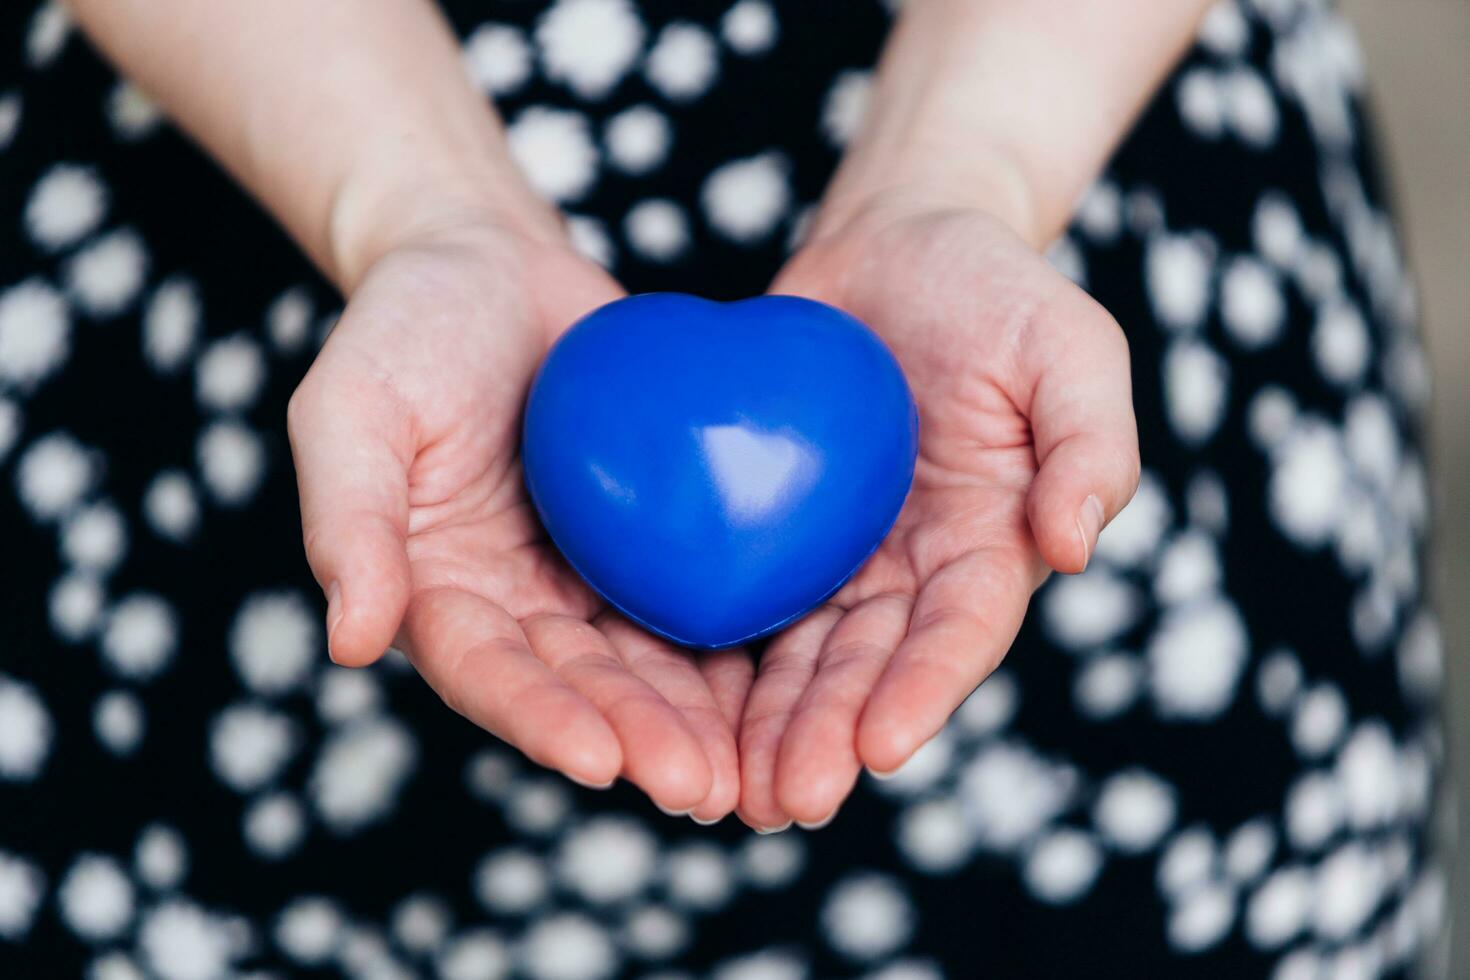 Blue heart in the hands of a woman in a polka dot dress photo